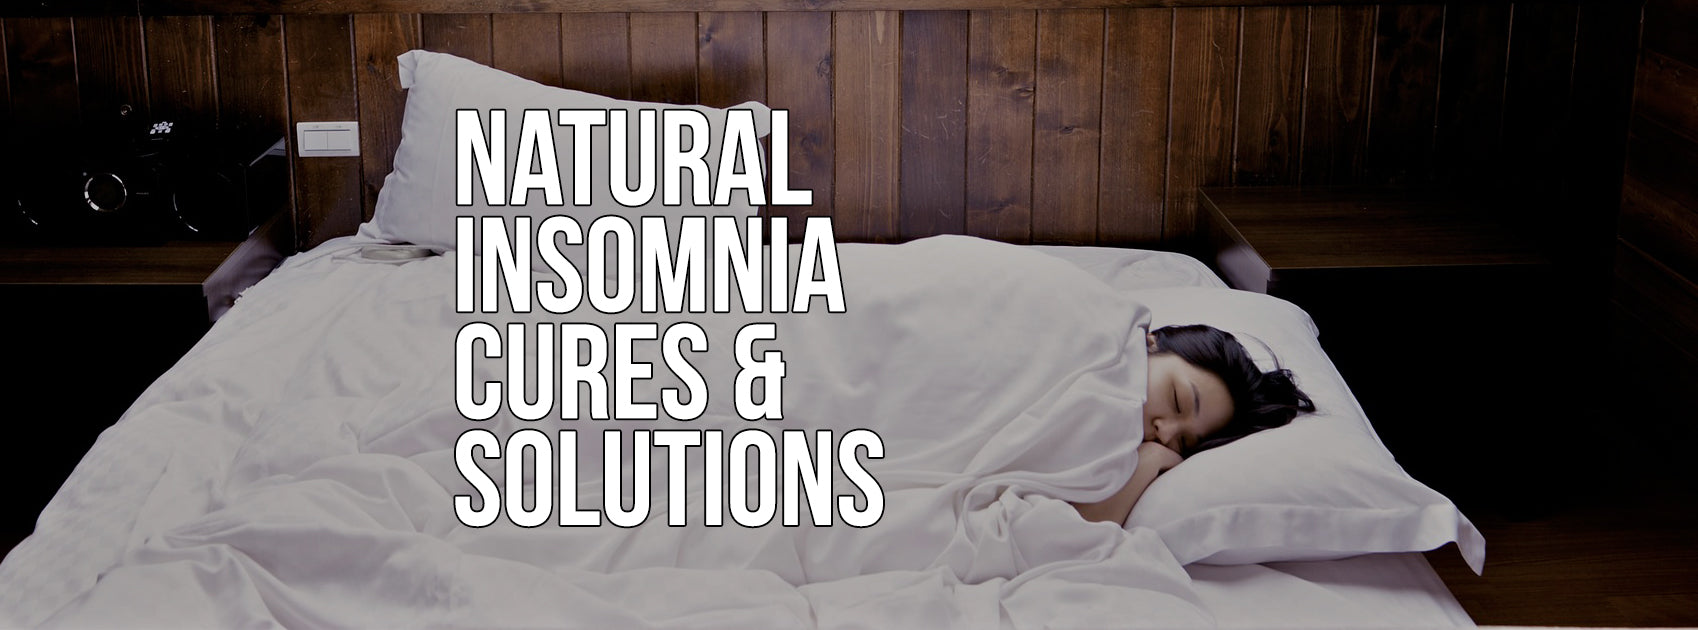 Natural Insomnia Cures & Solutions